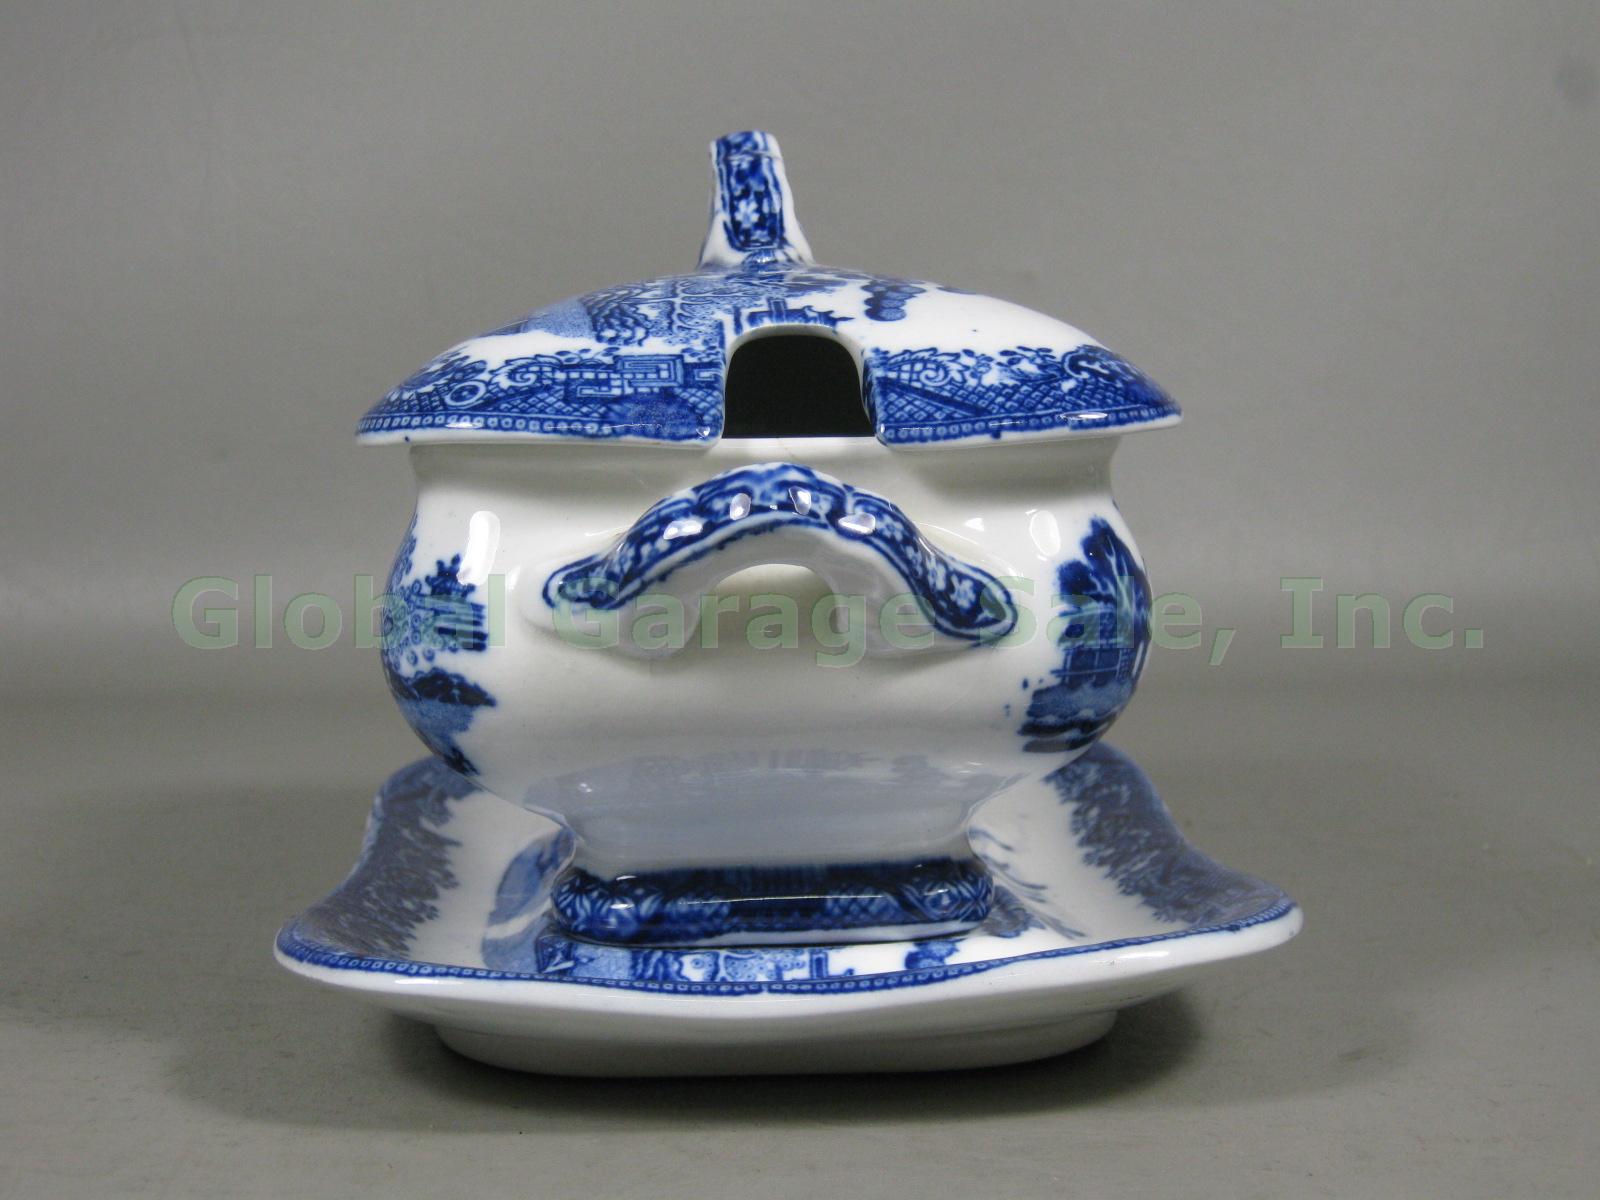 Vintage Antique Royal Doulton Blue Willow Soup Tureen With Underplate & Ladle NR 2